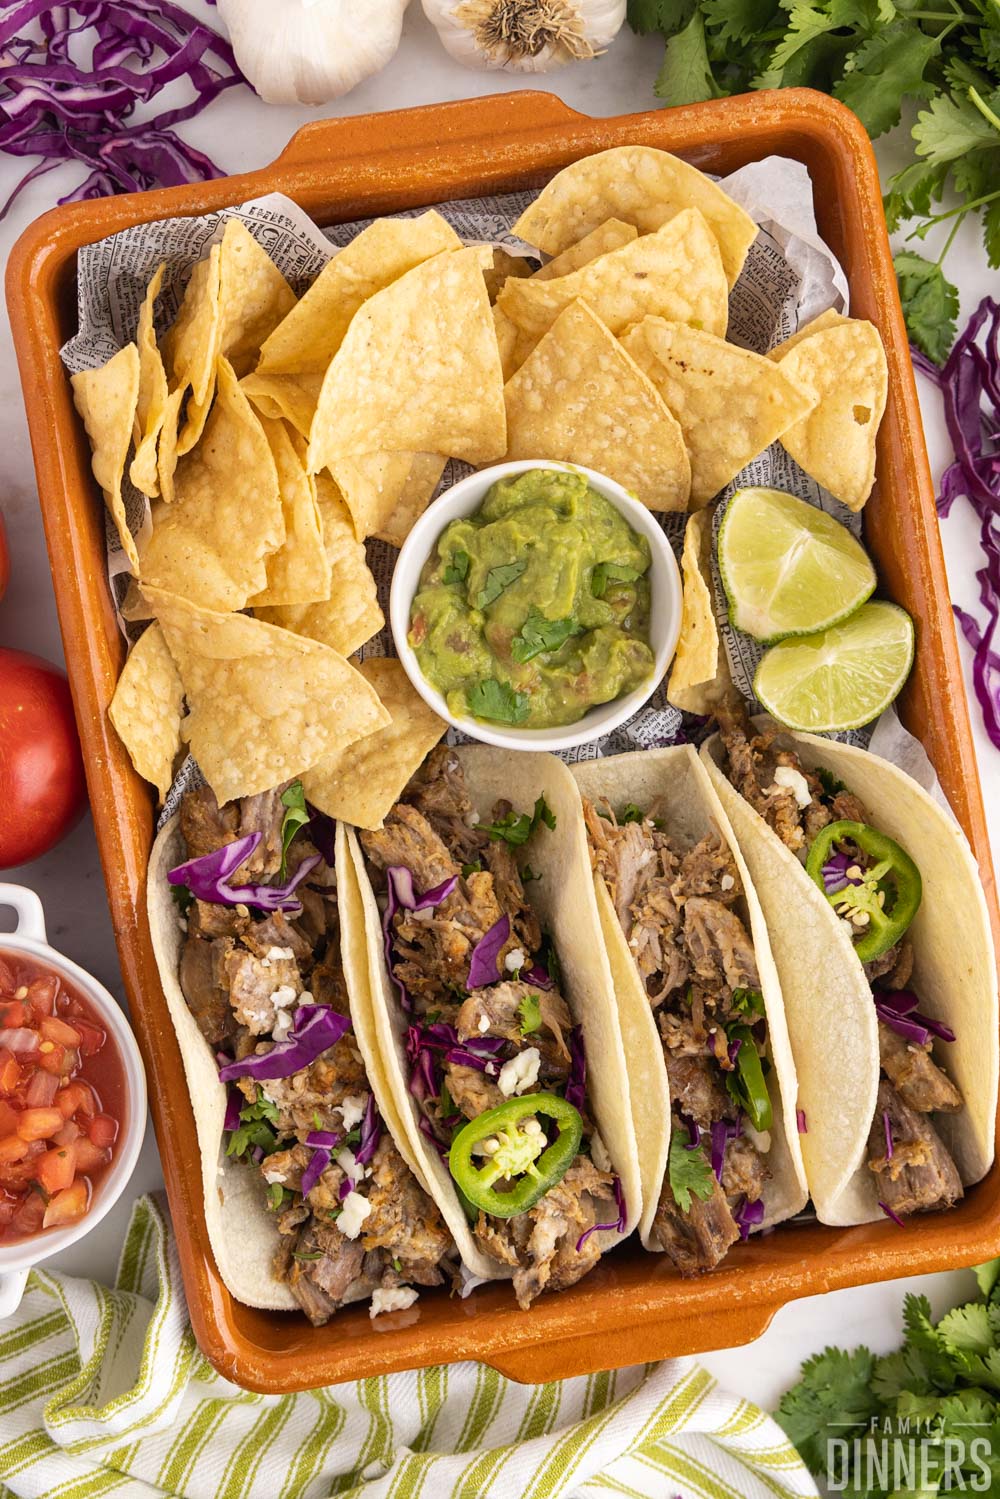 carnitas tacos with chips and guacamole in an orange rectangular dish